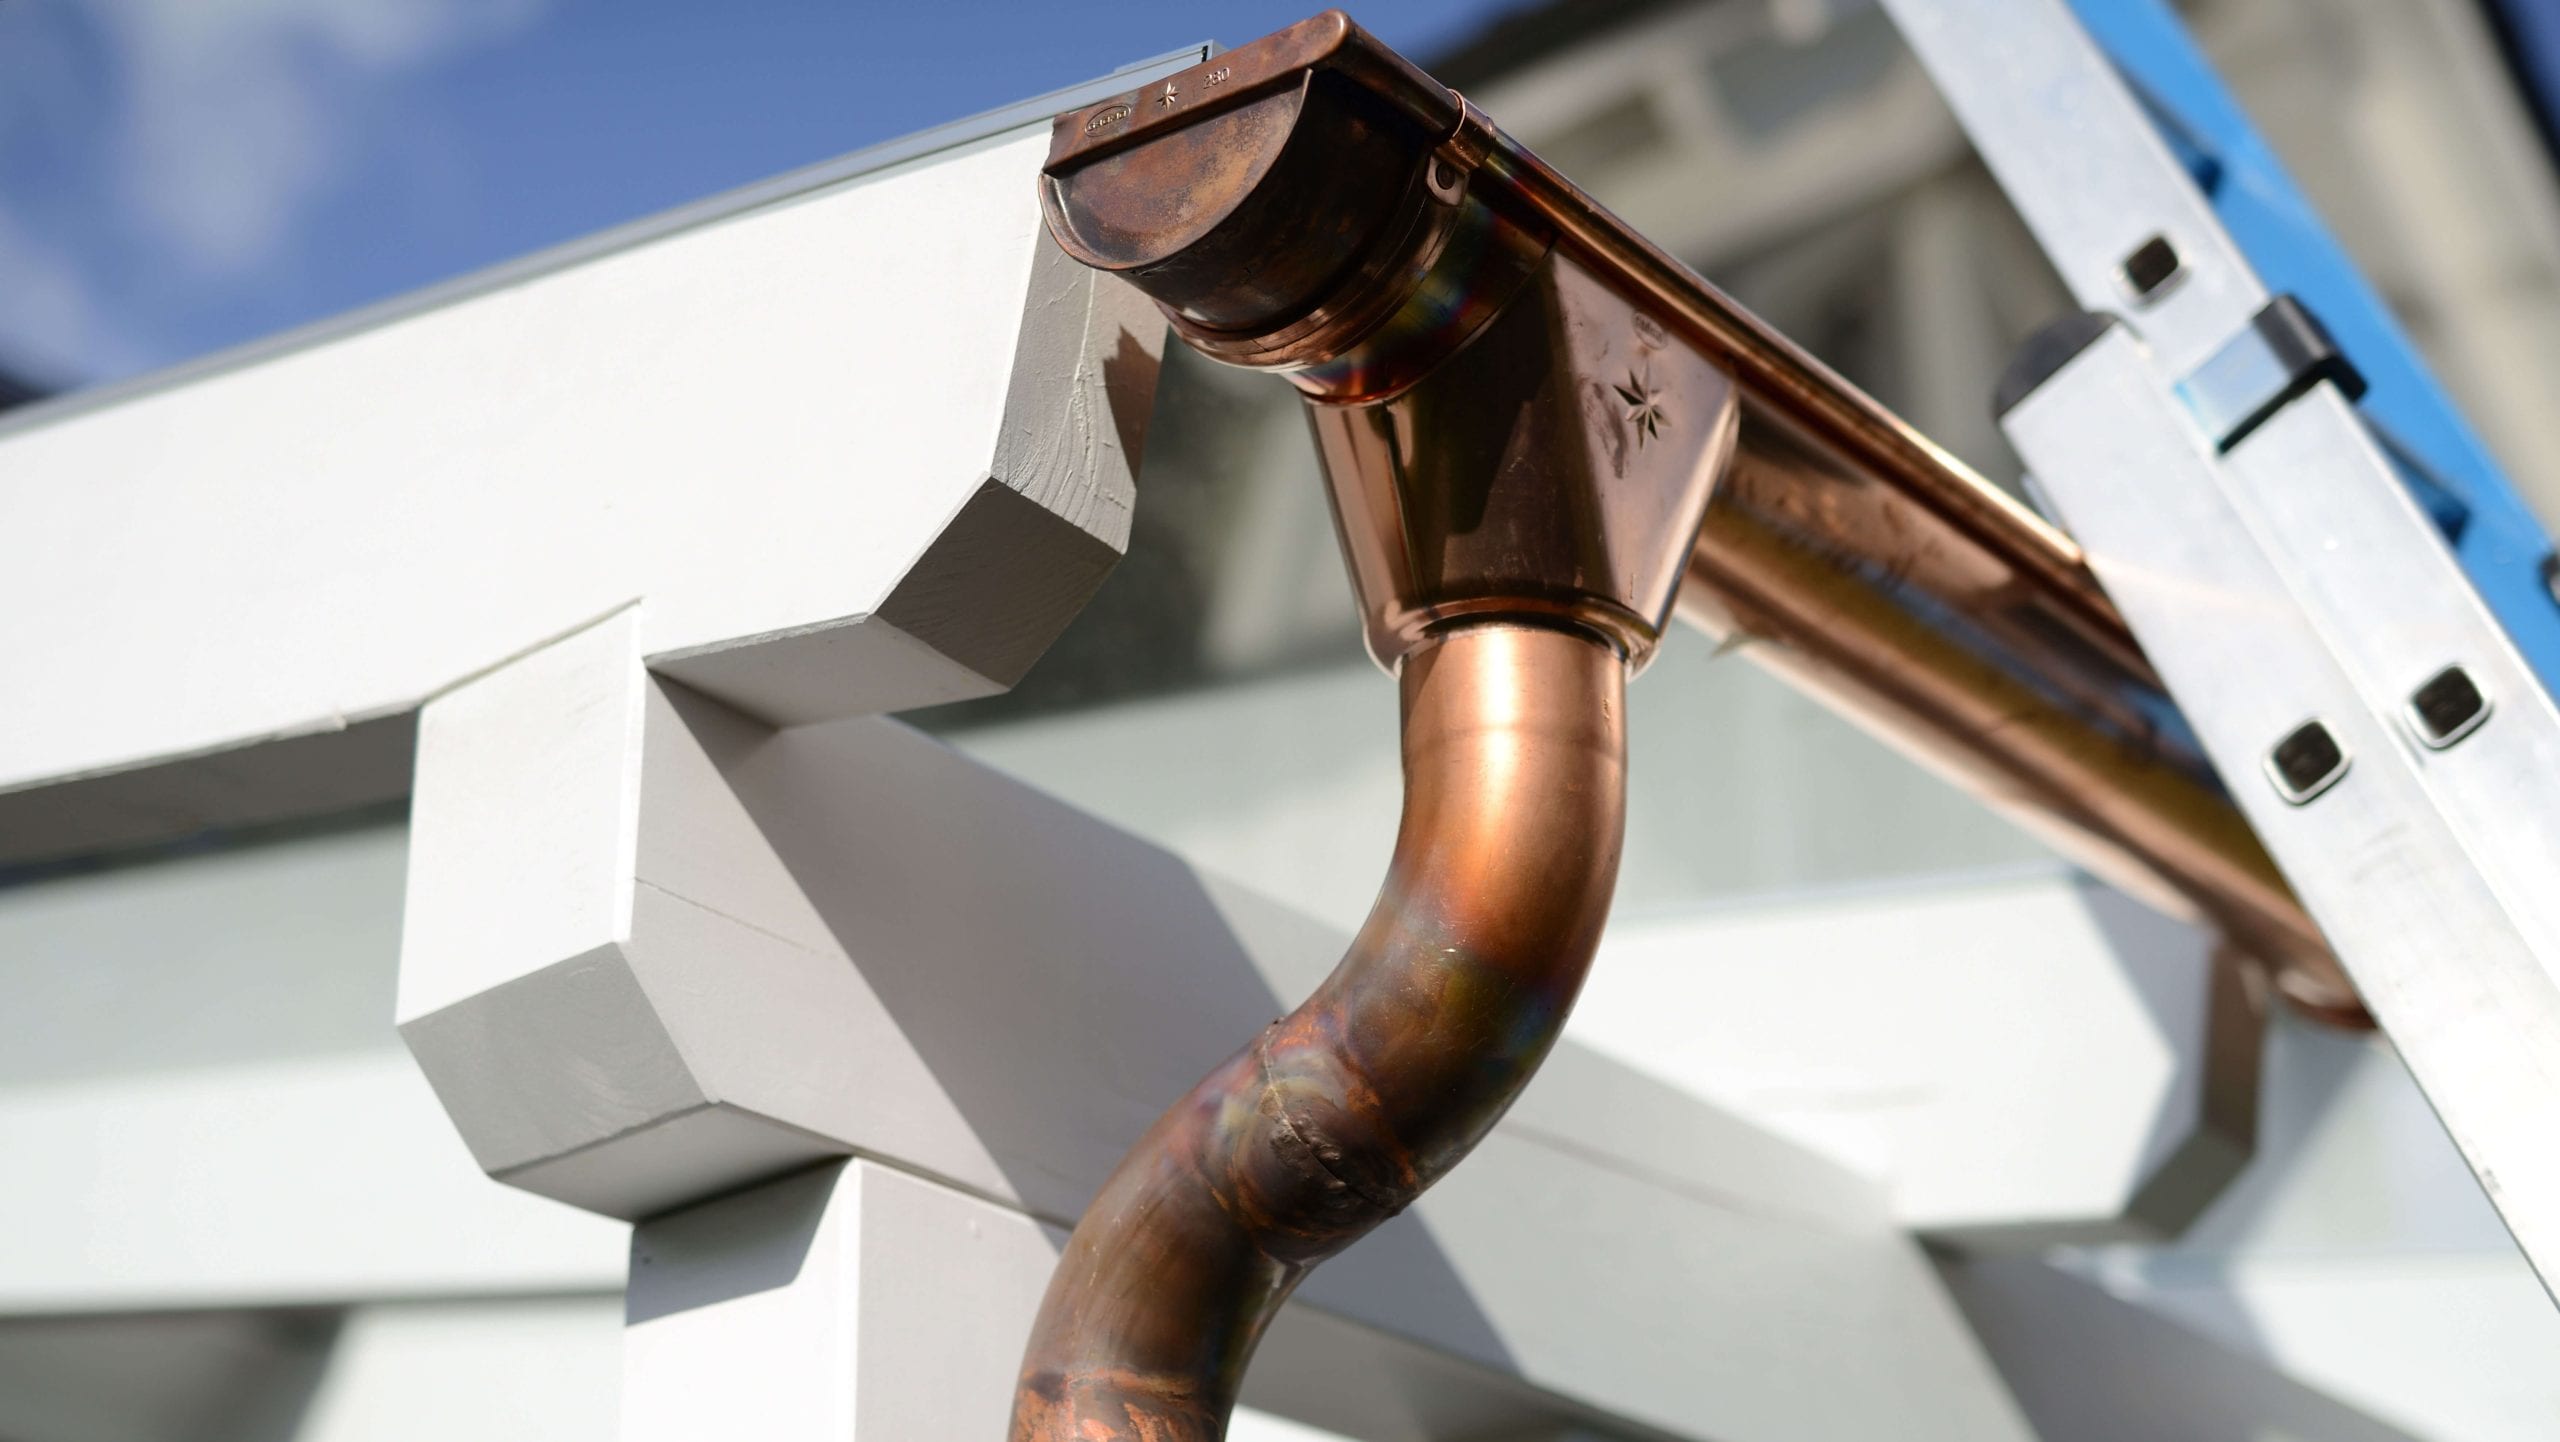 Make your property stand out with copper gutters. Contact for gutter installation in Bluffton